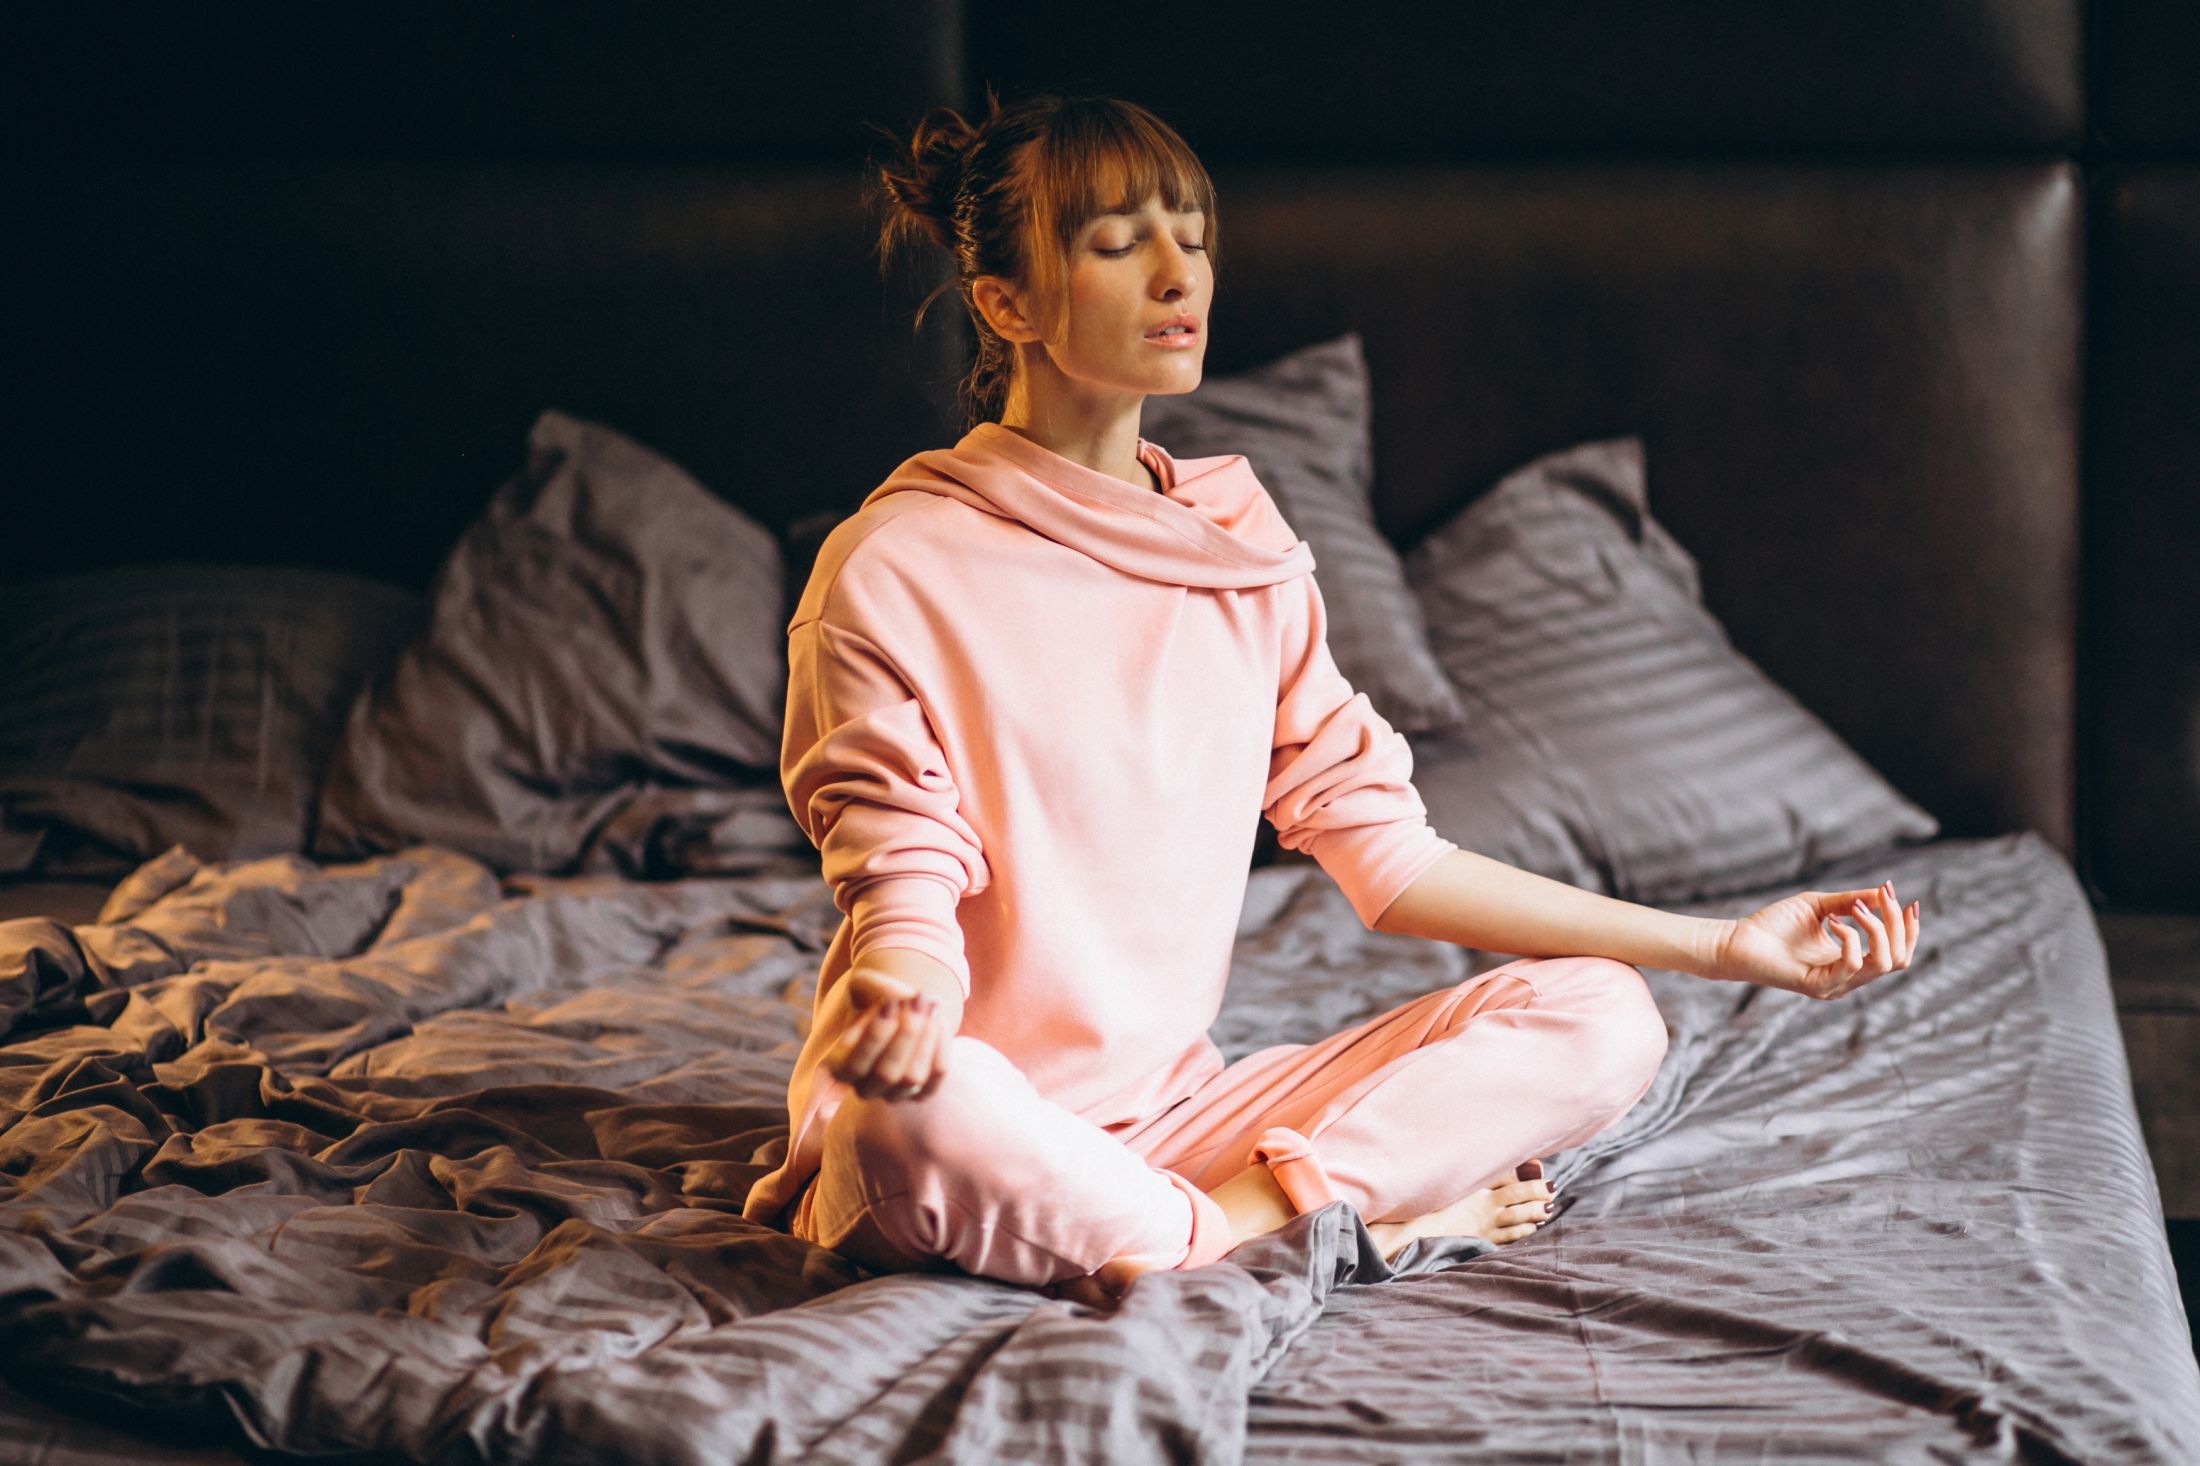 woman-doing-yoga-in-bed.jpg